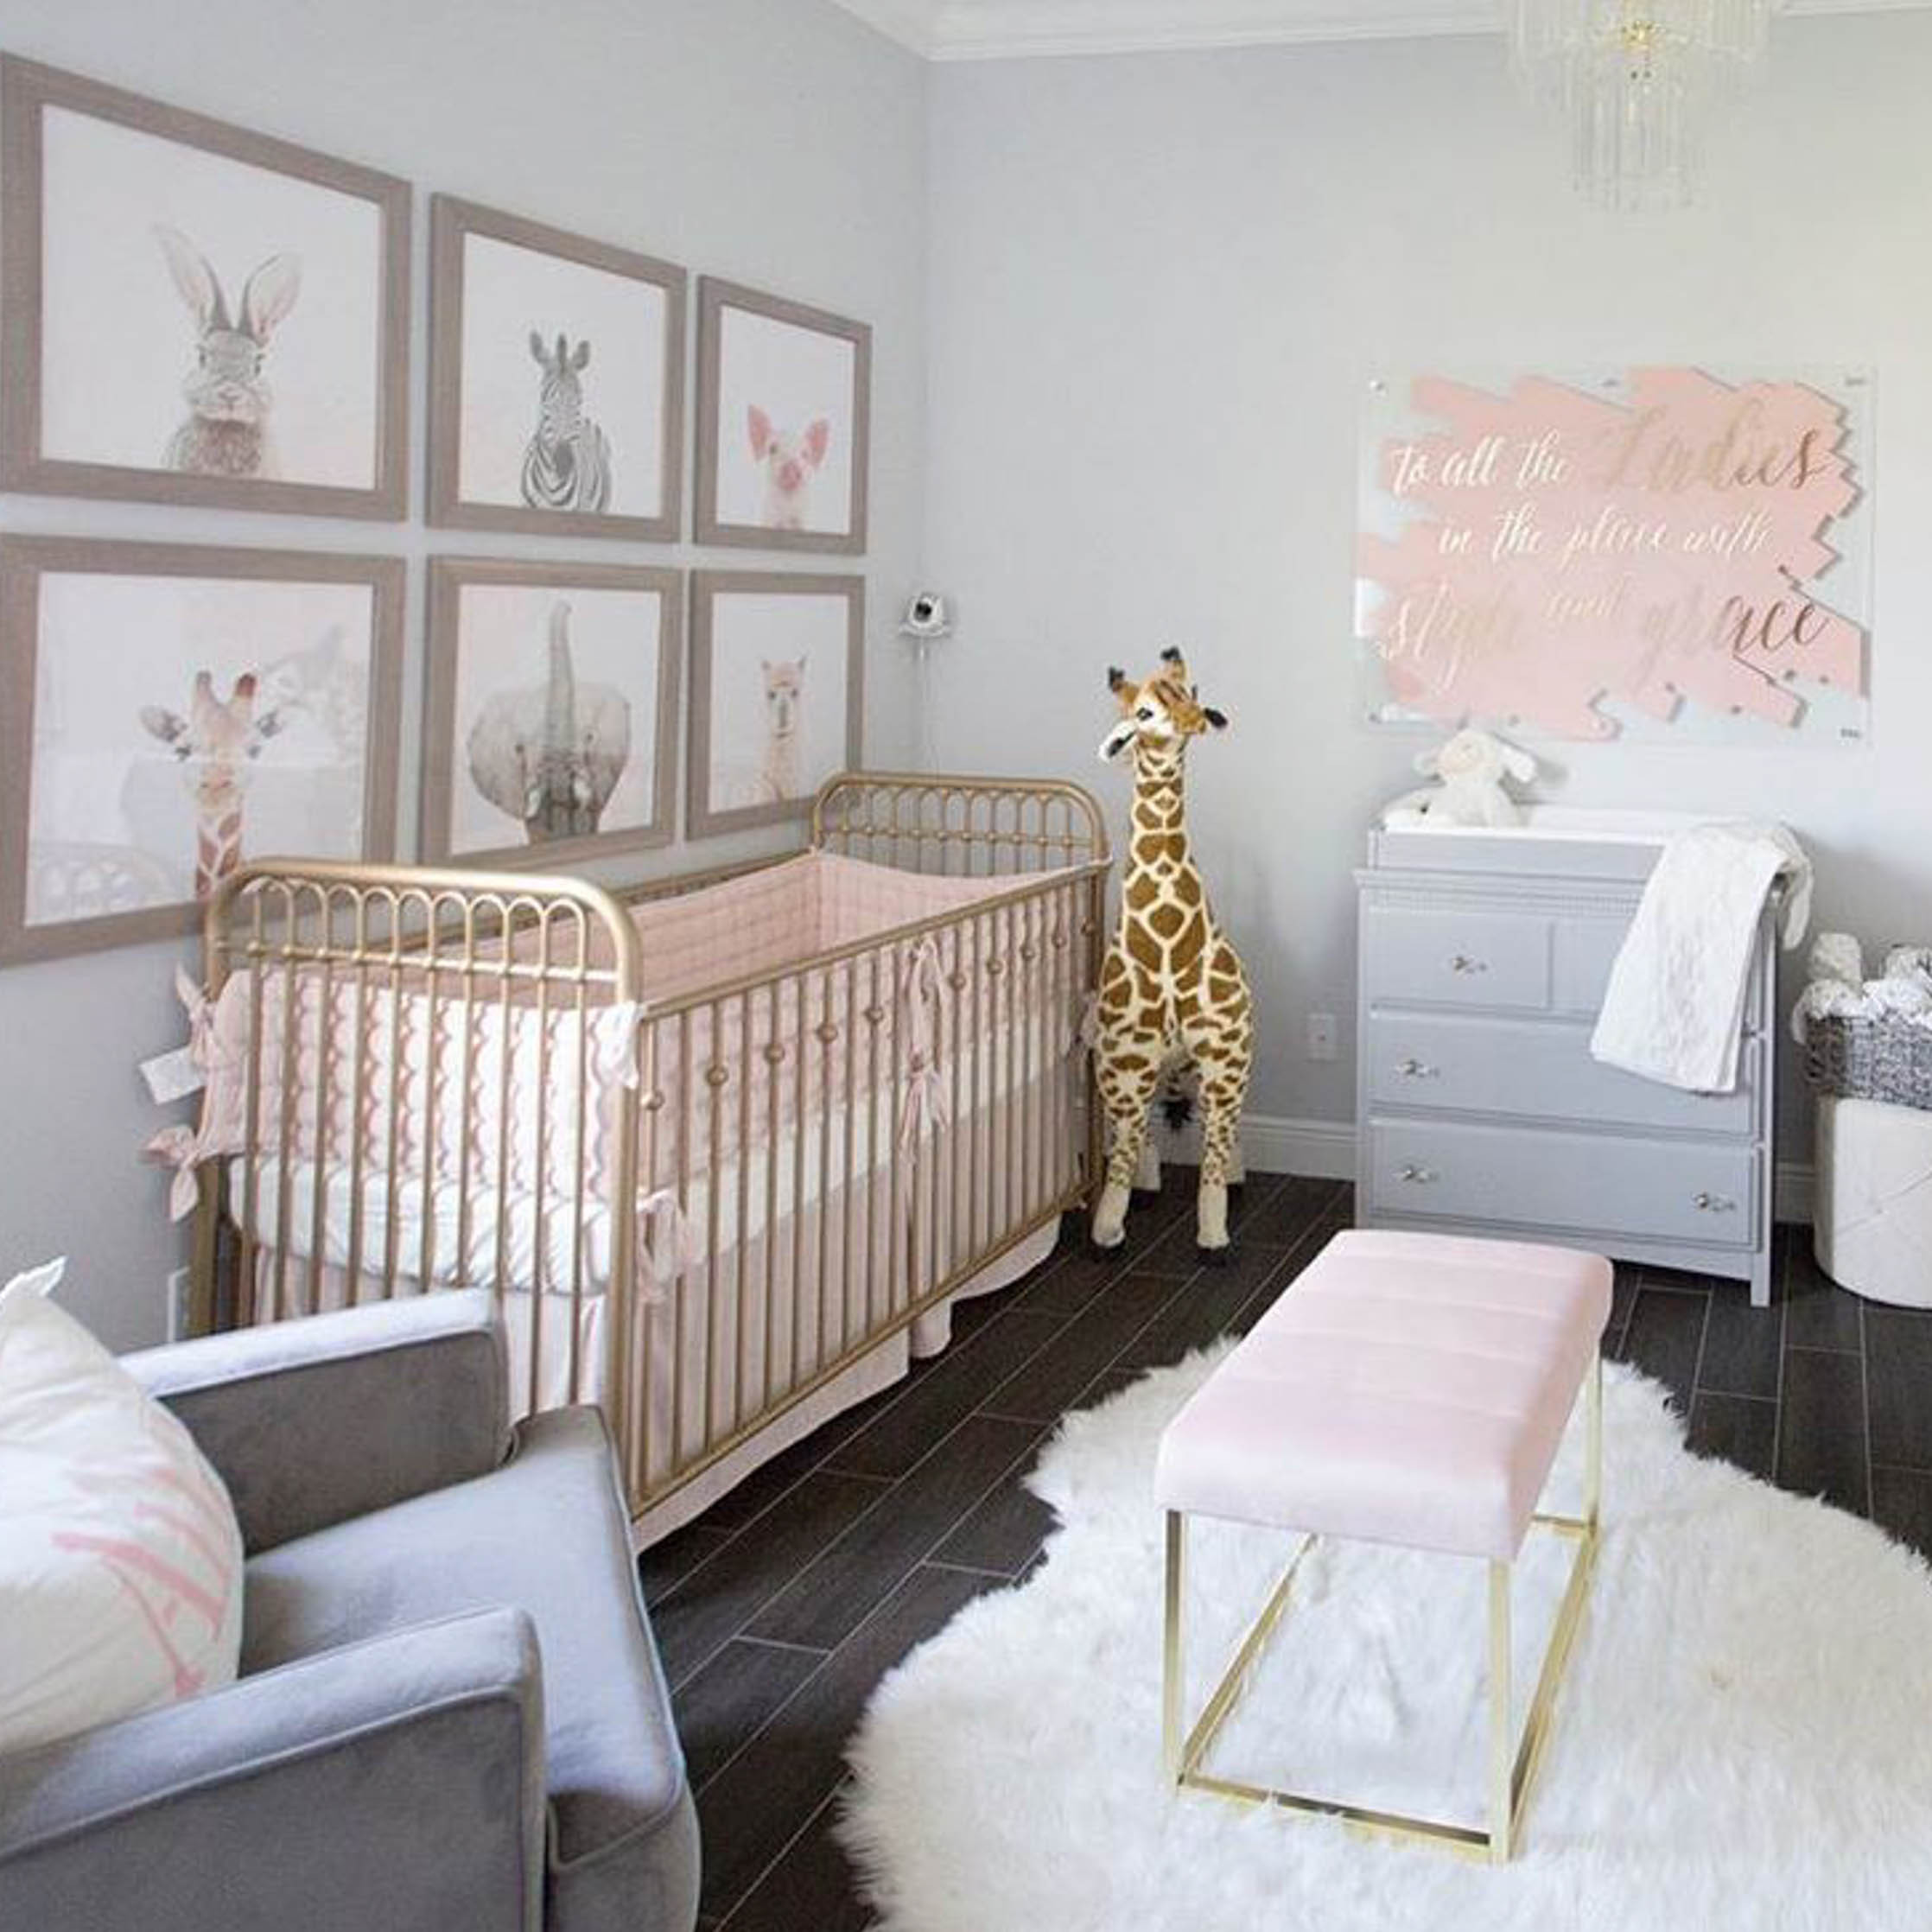 Gray Baby Room Decor
 Here s What s Trending in the Nursery Project Nursery